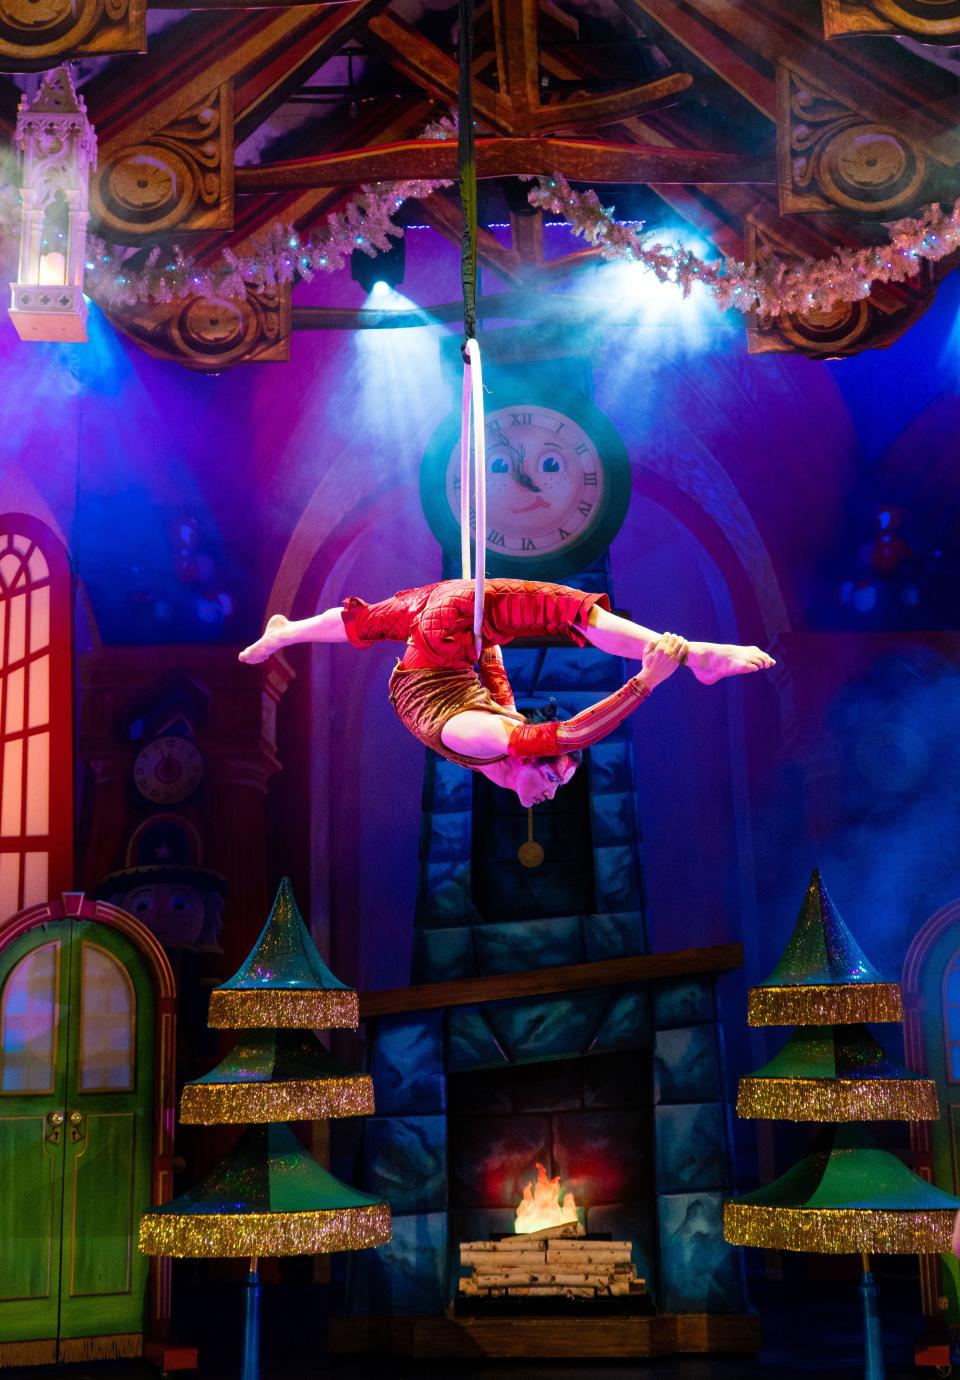 The Cirque Dreams Holidaze show includes a world-renowned cast of performers, including an ensemble of aerial circus acts, jugglers, rope skippers, acrobats and other contemporary and traditional circus acts.